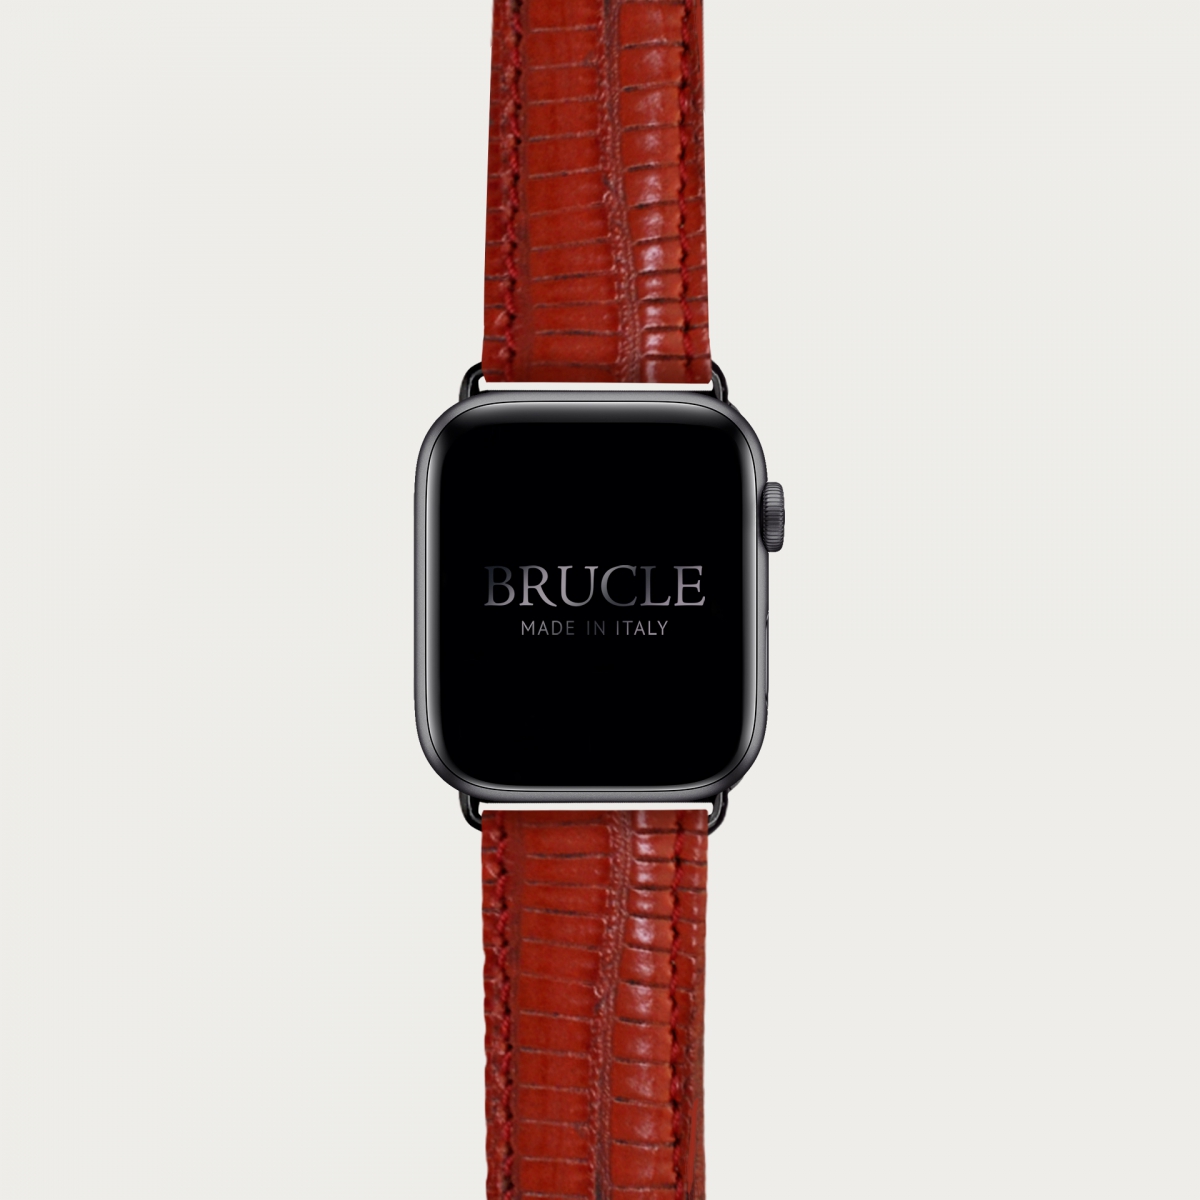 Leather Watch band compatible with Apple Watch / Samsung smartwatch, red lizard print